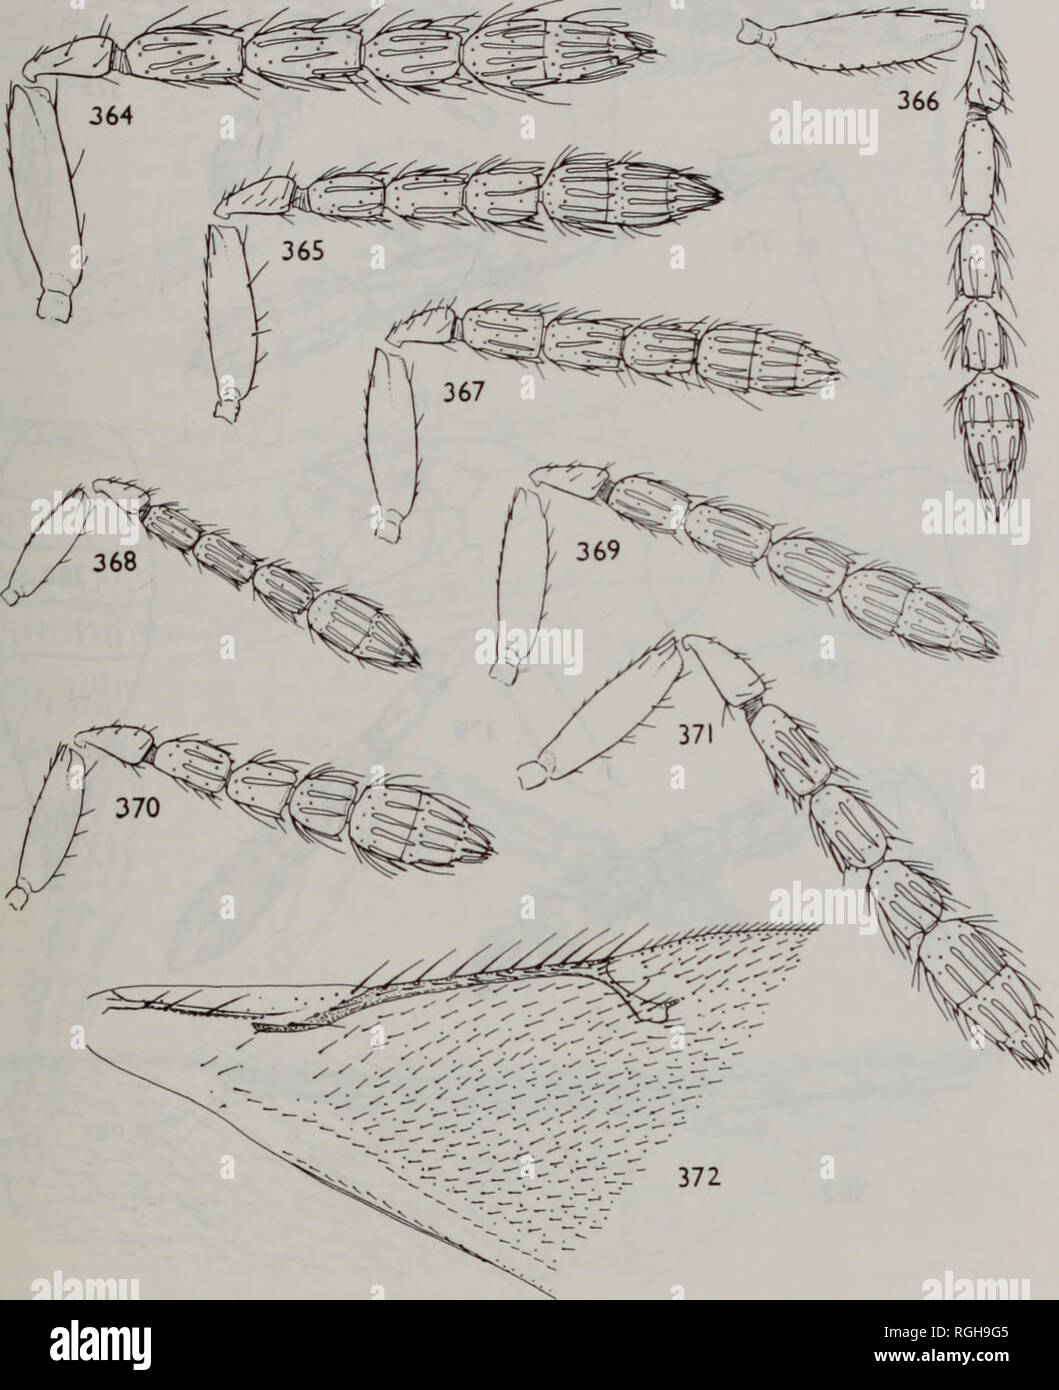 . Bulletin of the British Museum (Natural History) Entomology. THE EUROPEAN TETRASTICHINAE 173. Figs 364-372 364, Aprostocetus (Aprostocetus) rufiscapus sp. n. $, antenna. 365, A. (A.) constrictus sp. n. 9, antenna. 366, A. (A.) flavifrons (Walker) $, antenna. 367, A. (A.) coccidiphagus sp. n. $, antenna. 368, A. (A.) ceroplastae (Girault) $, antenna, holotype. 369, A. (A.) toddaliae (Risbec) $, antenna, paralectotype. 370, A. (A.)brachycerus (Thomson) $, antenna. 371, A (A.)epilobiisp. n. $, antenna. 372, A. (A.) ceroplastae (Girault) 9, forewing, paratype.. Please note that these images are  Stock Photo